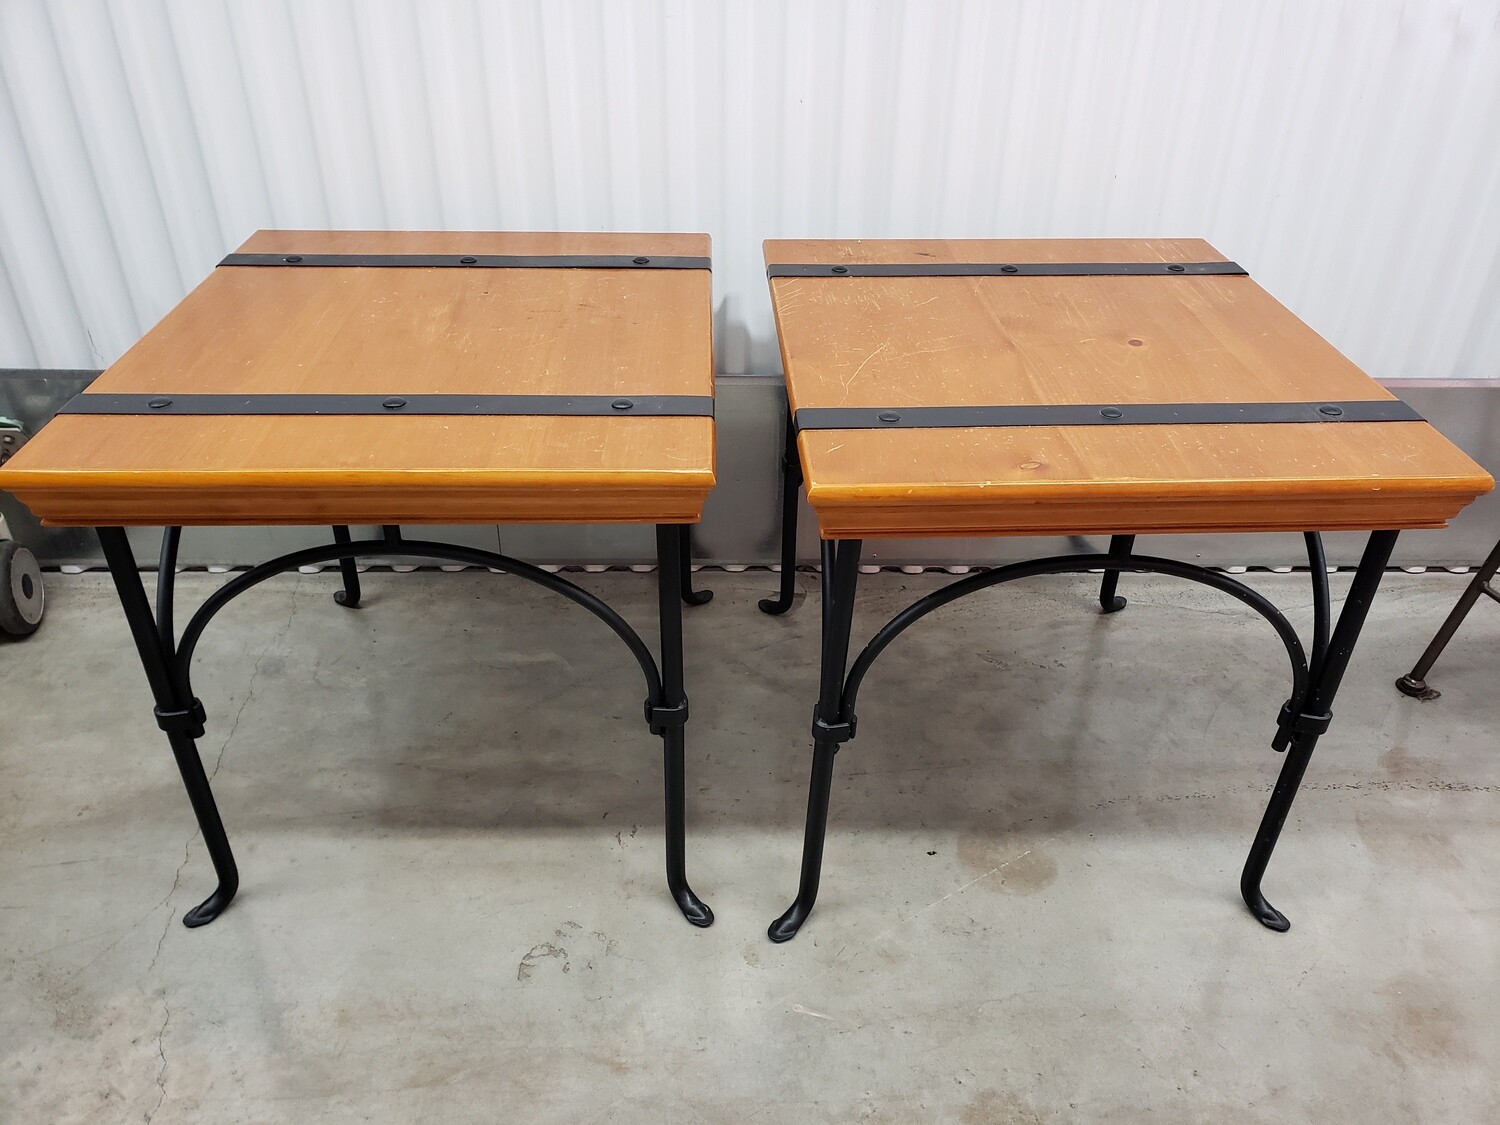 2 End Tables - Pine with Metal Frame #2118